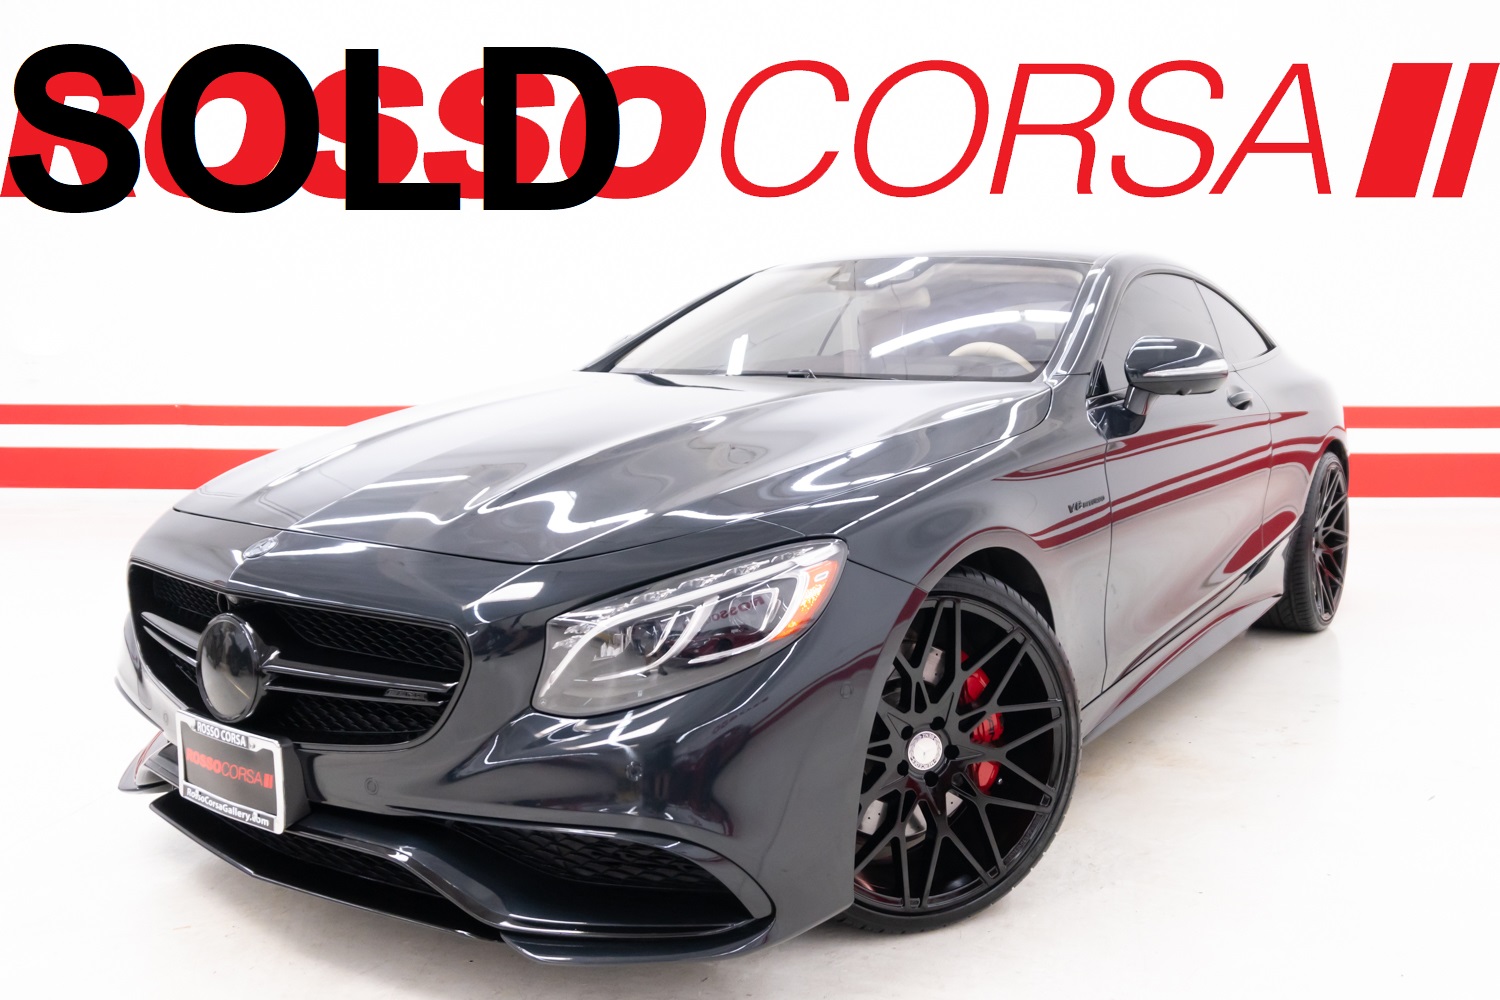 2015 Mercedes-Benz S63 AMG 4MATIC Coupe CUSTOM ($180K MSRP)